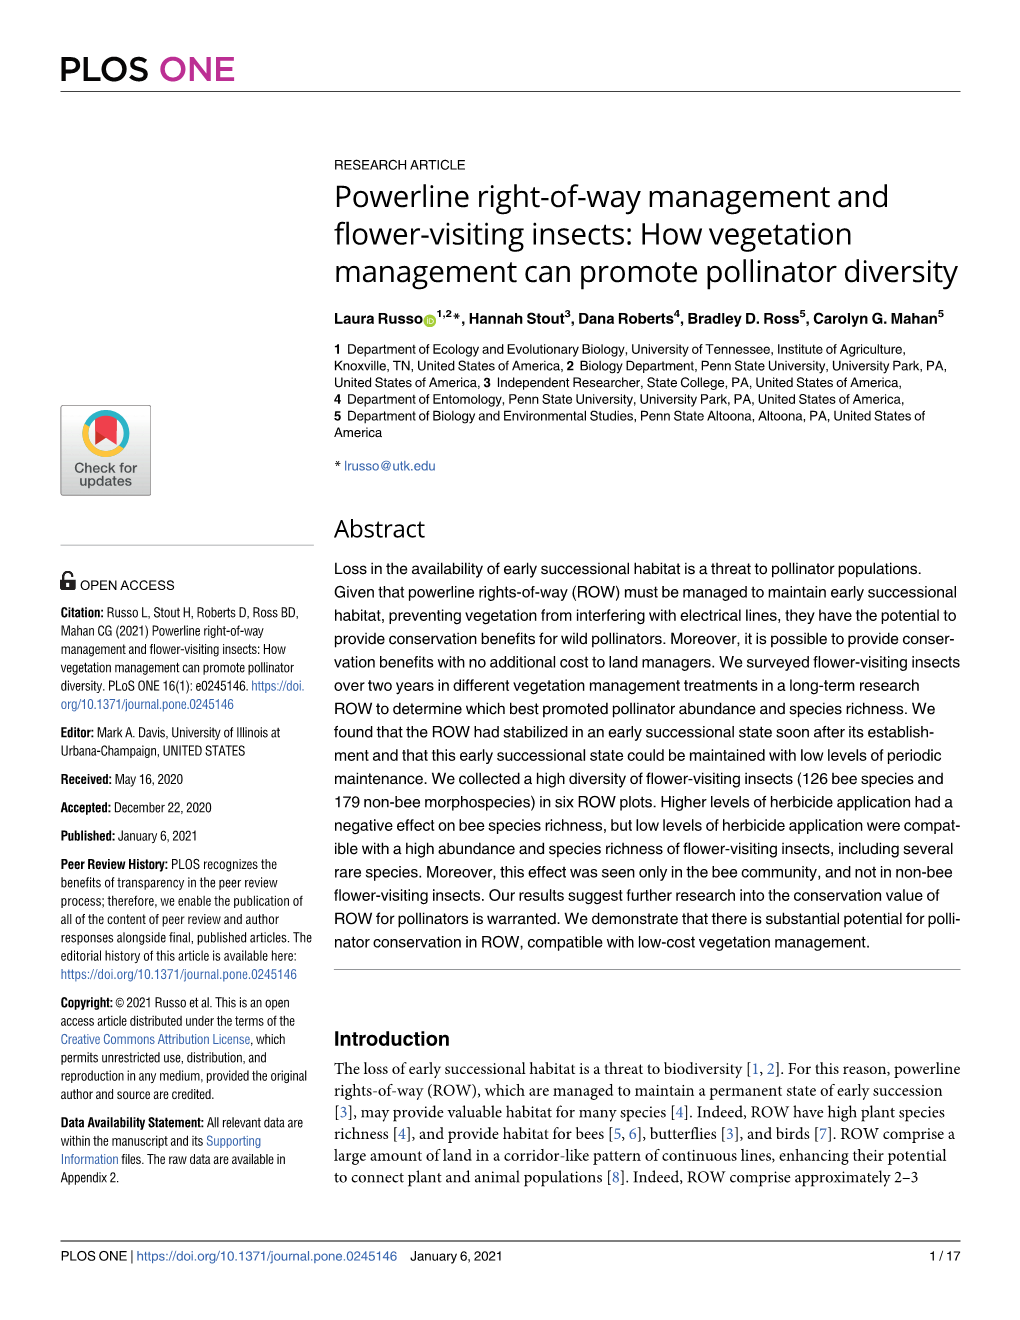 Powerline Right-Of-Way Management and Flower-Visiting Insects: How Vegetation Management Can Promote Pollinator Diversity